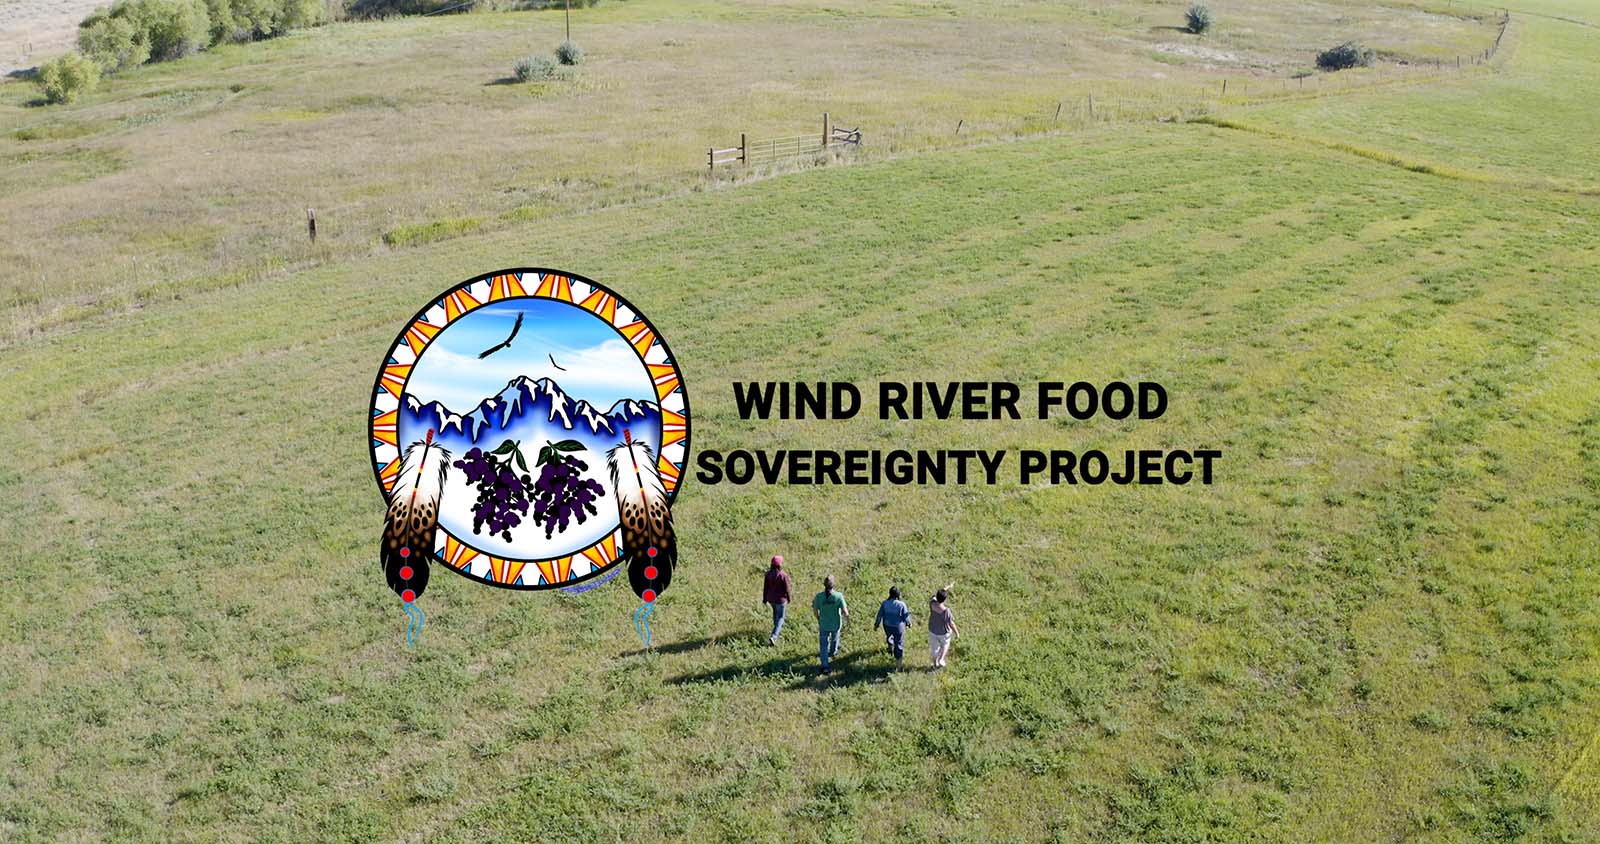 Aerial view of four people walking through green field. Logo and text for Wind River Food Sovereignty Project.